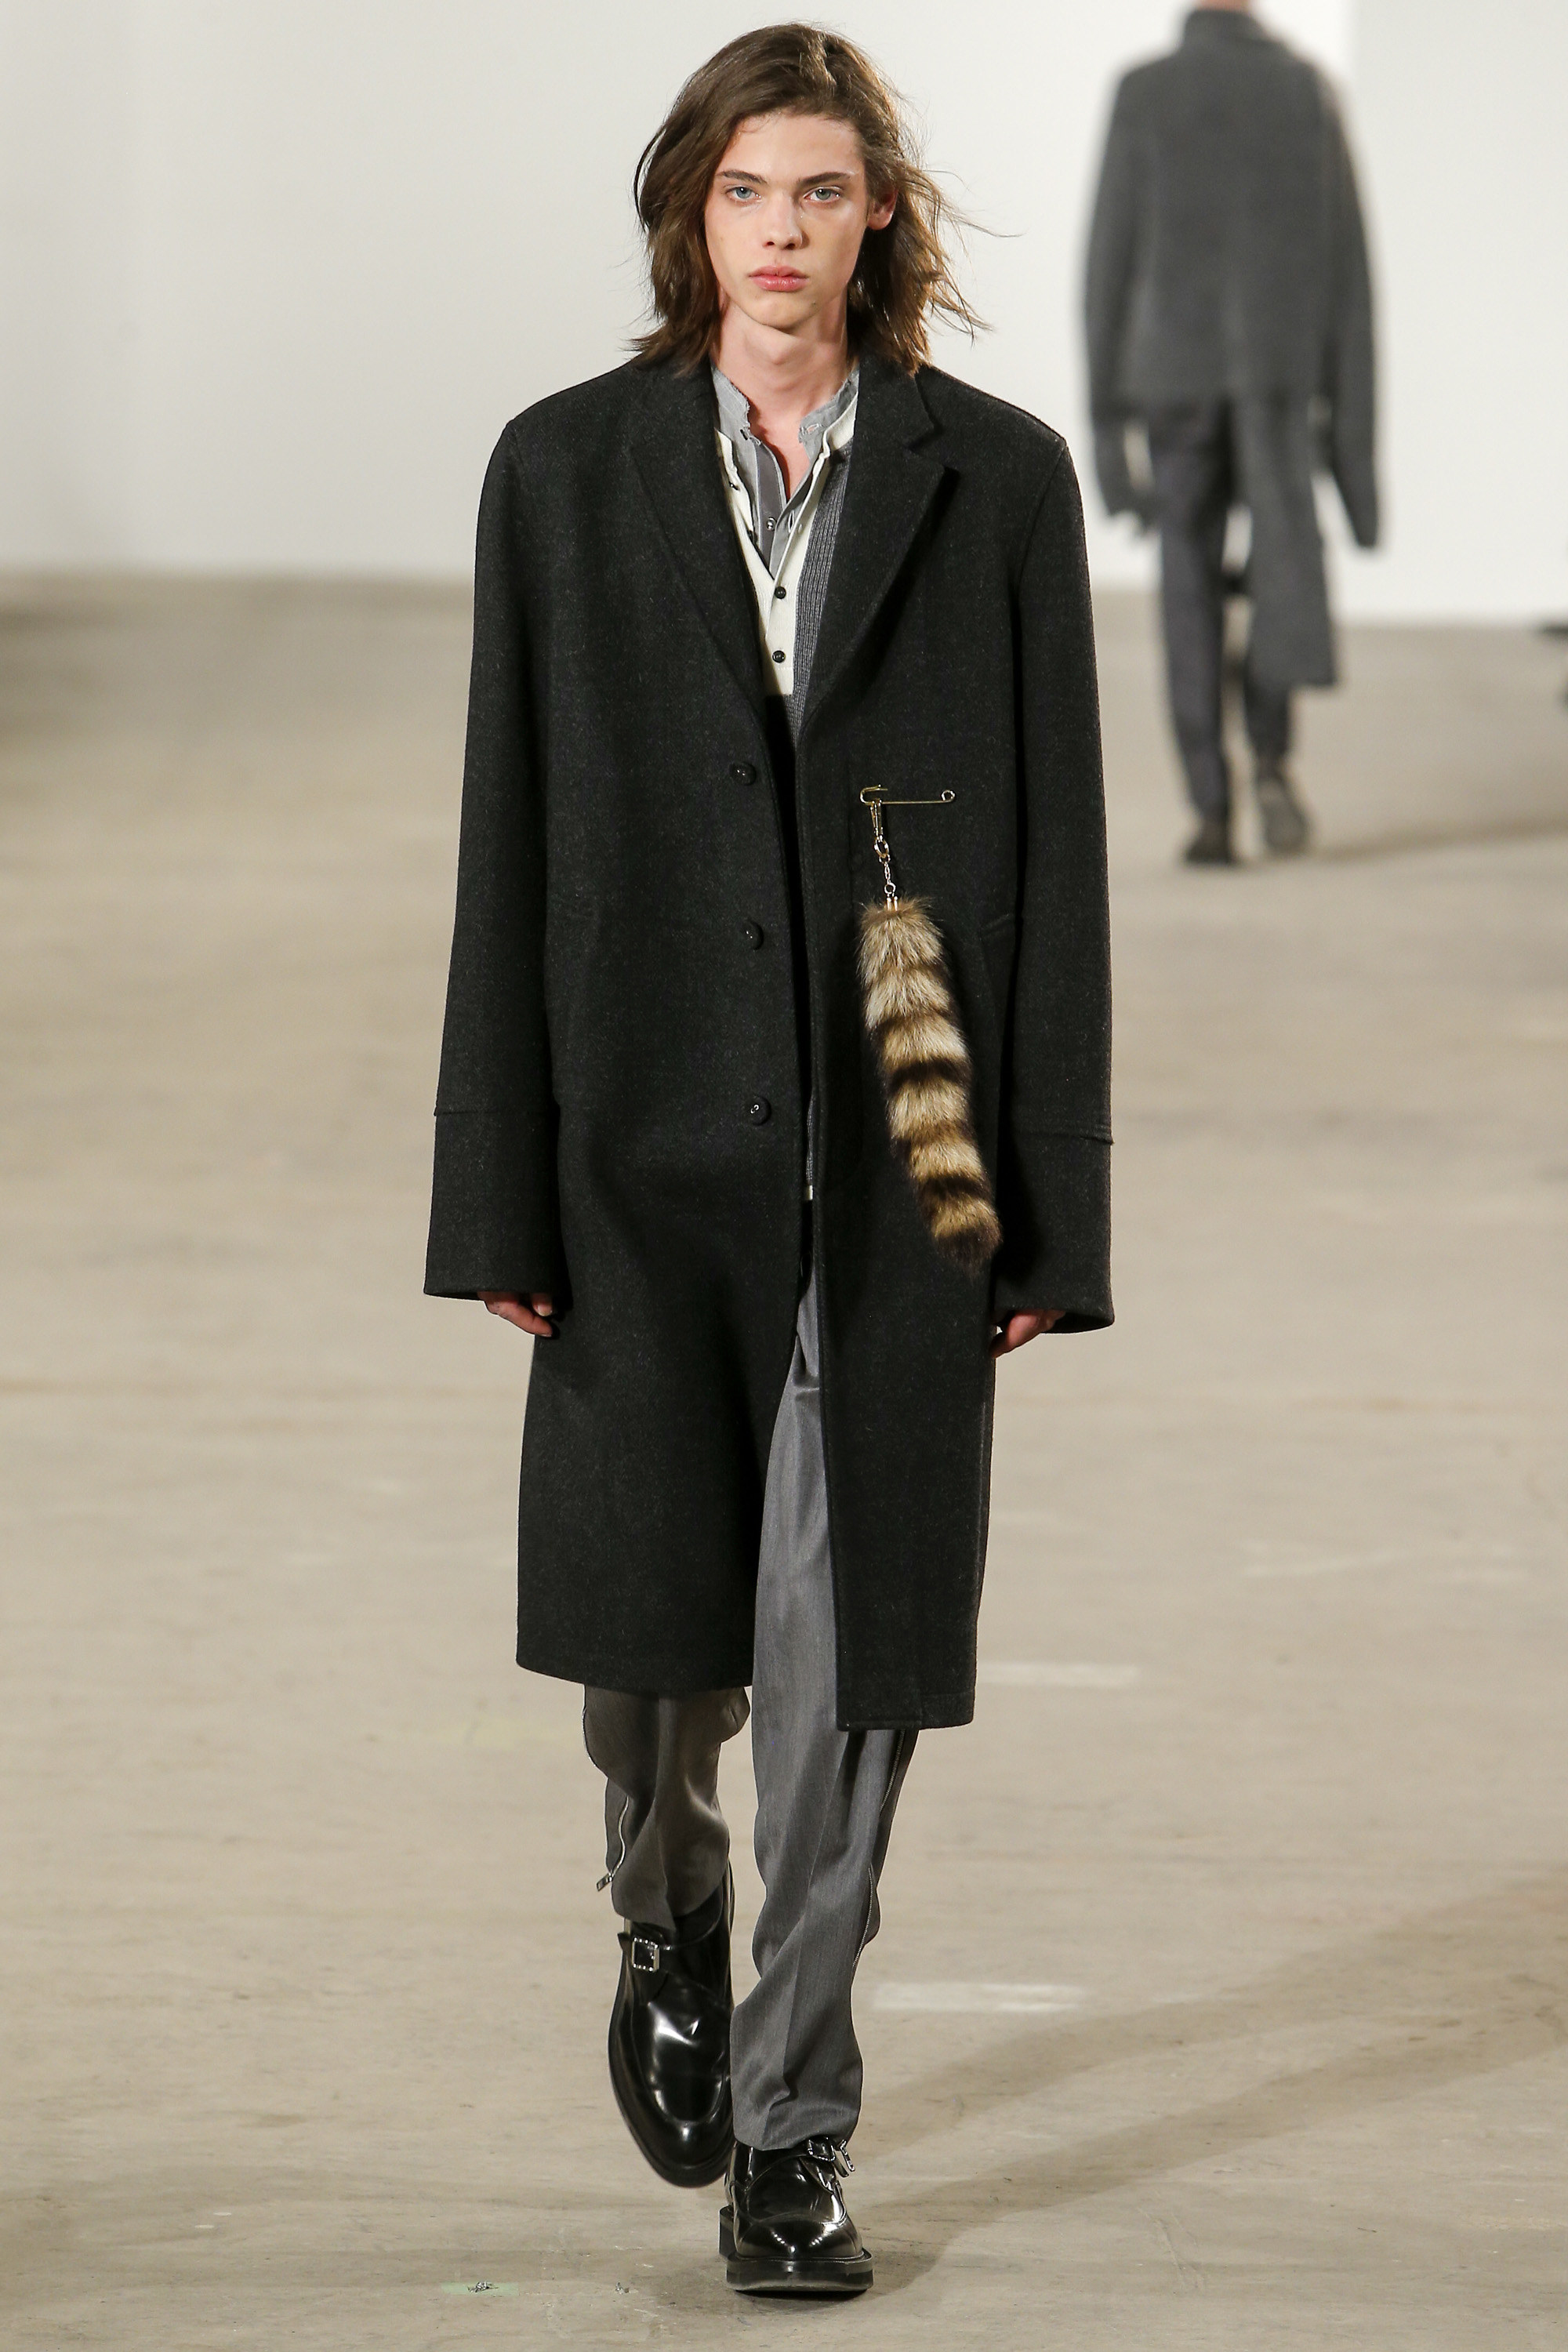 NYFW: Ovadia & Sons Autumn/Winter 2016 Collection